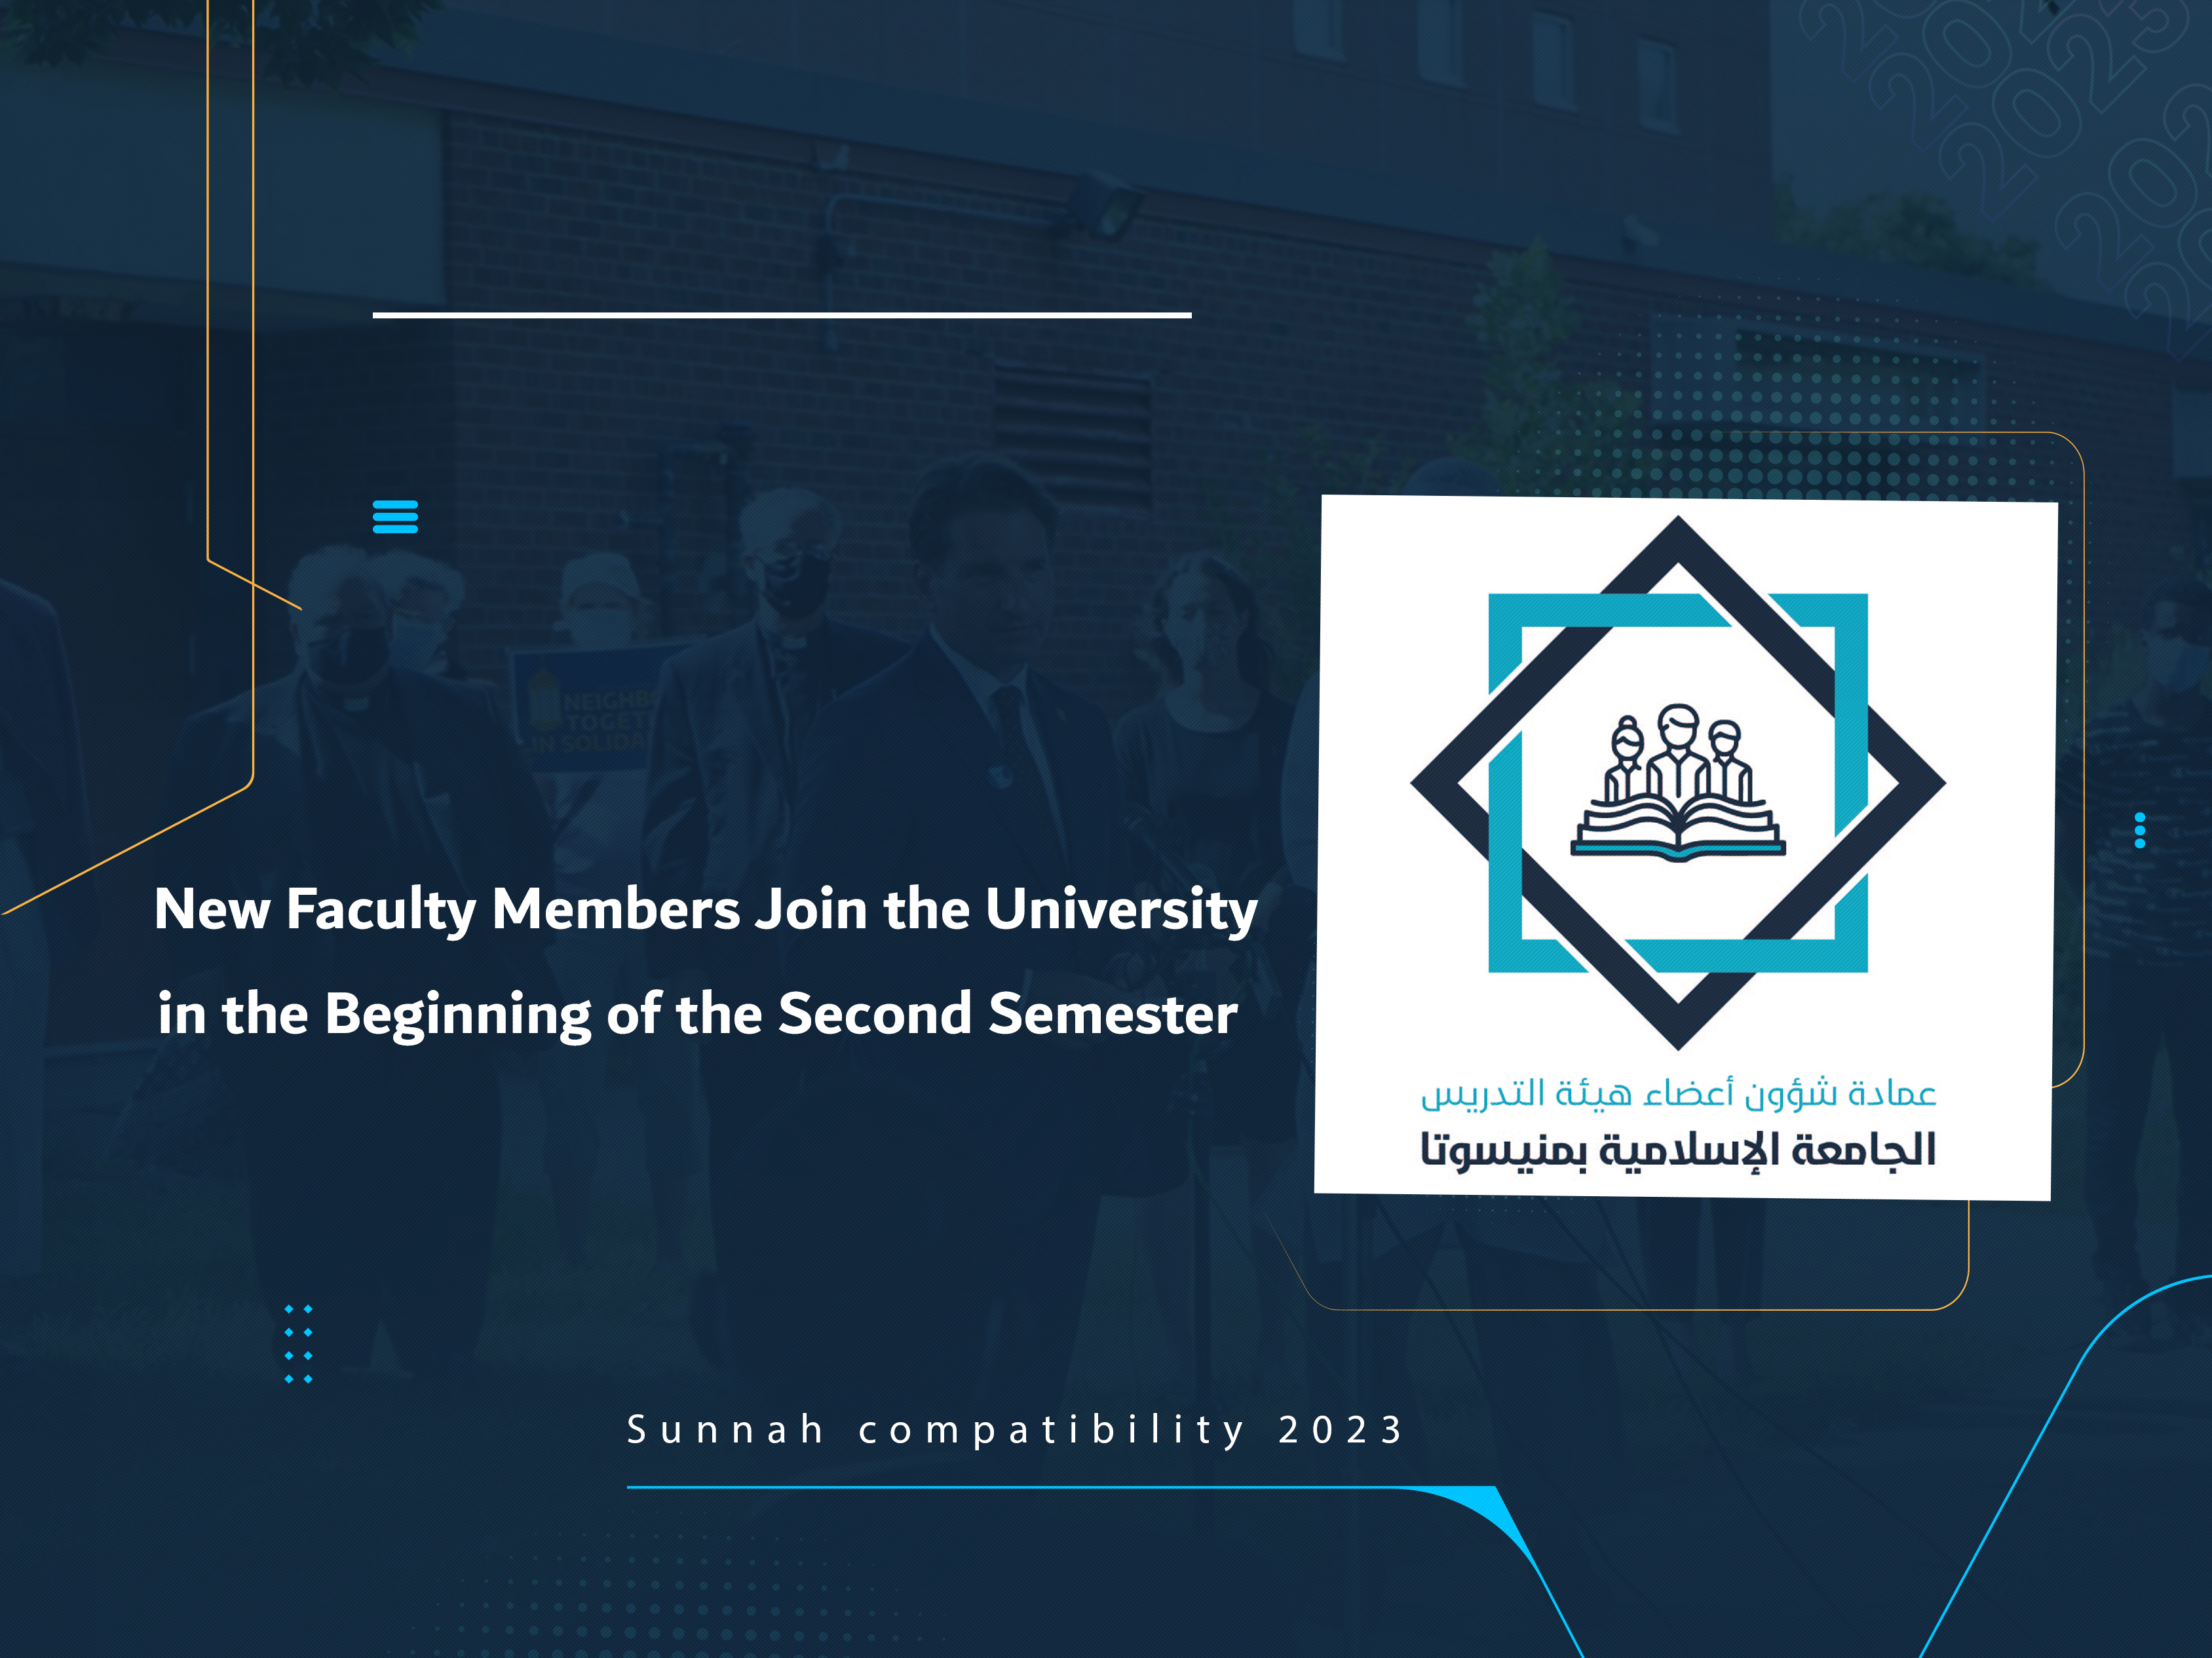 New Faculty Members Join the University in the Beginning of the Second Semester